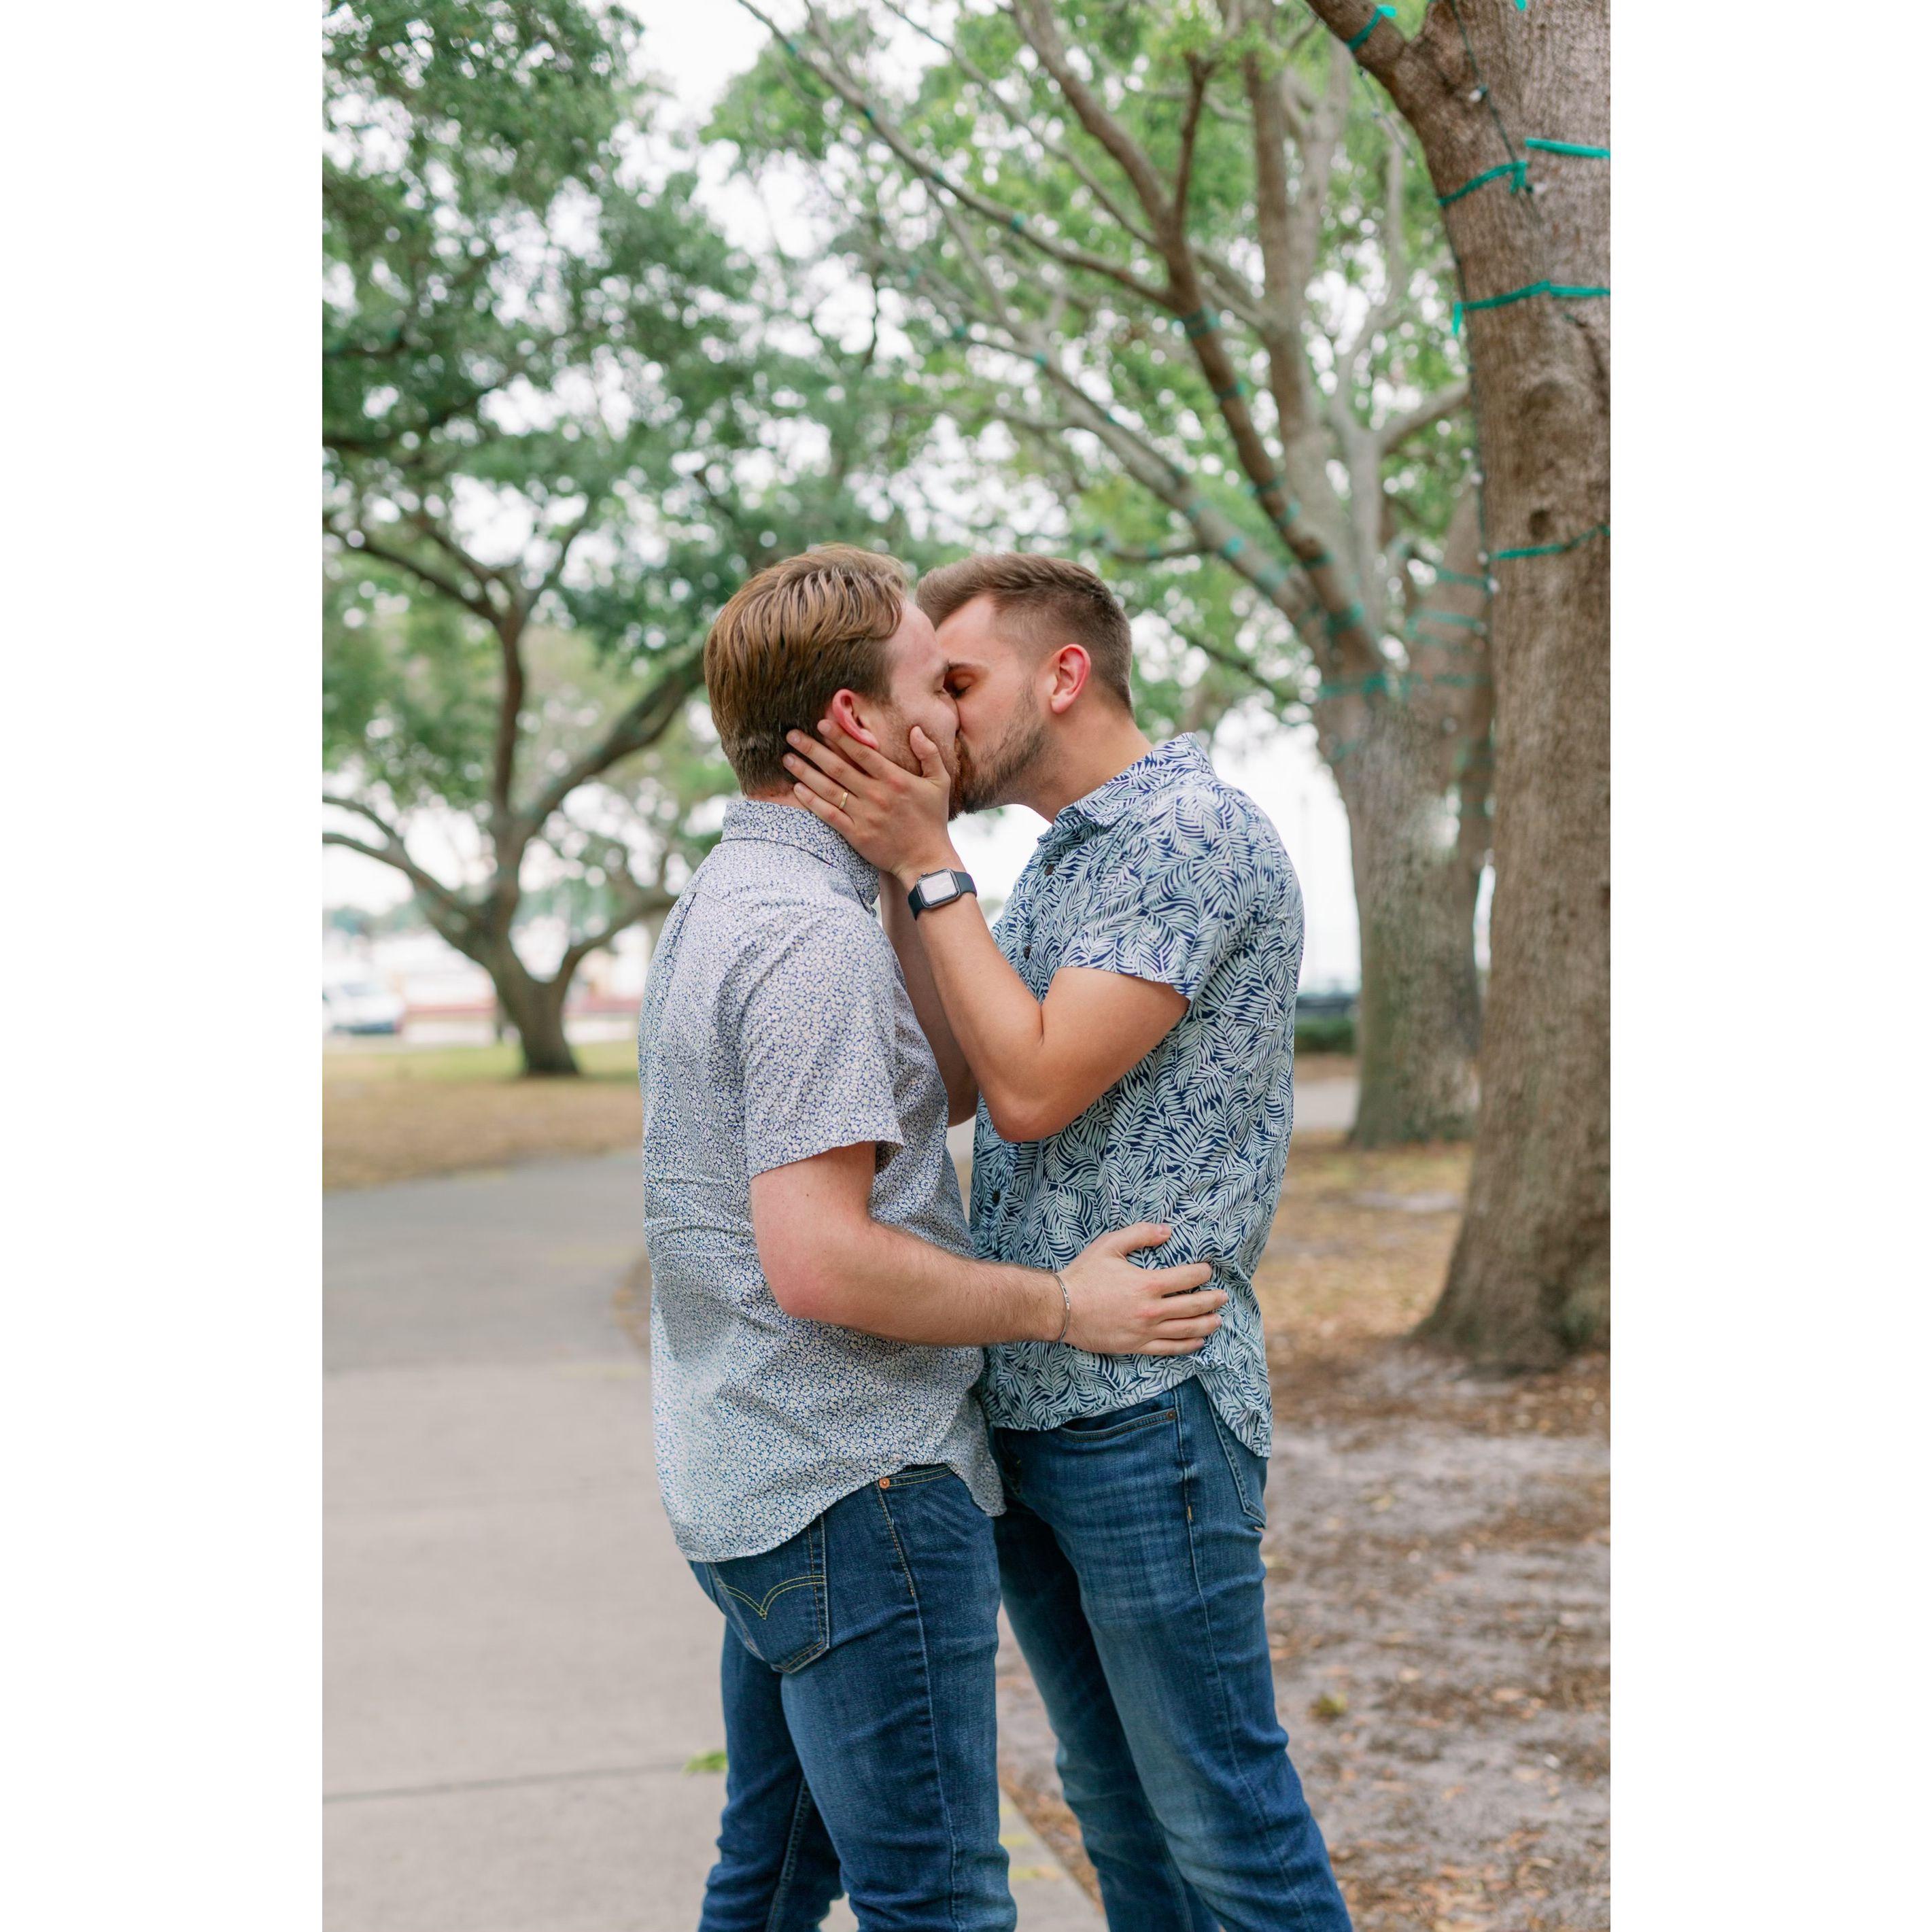 Proposal: On April 14, 2023, Michael proposed to Connor in St. Petersburg. The two were then joined by friends and family to celebrate. Join us back in St. Pete on March 23, 2024 for the wedding!